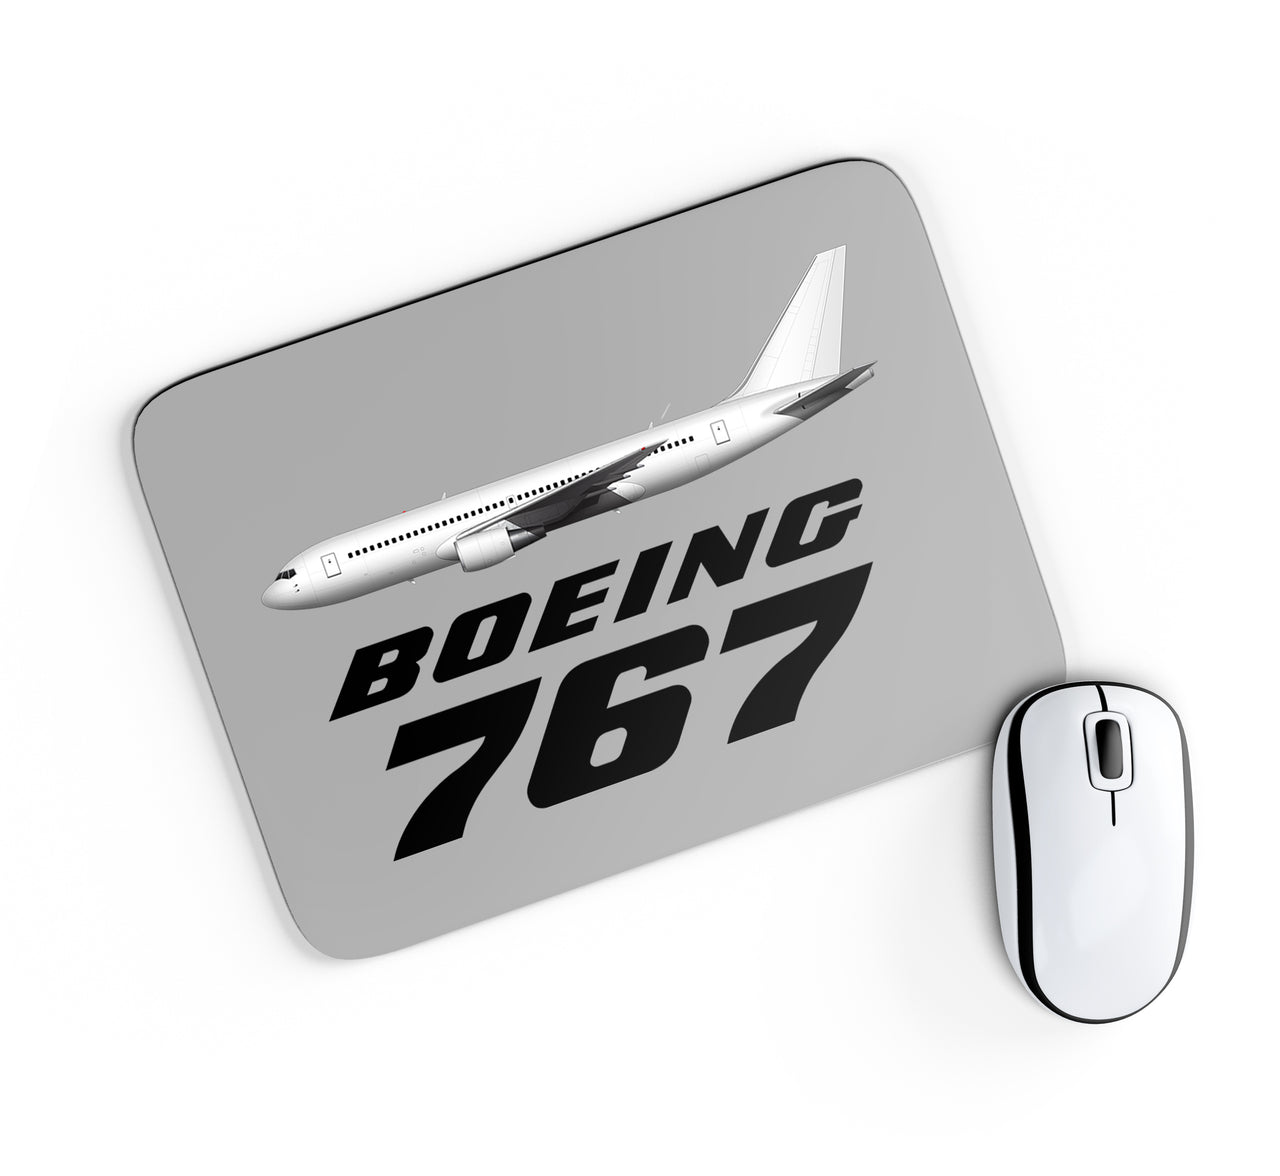 The Boeing 767 Designed Mouse Pads